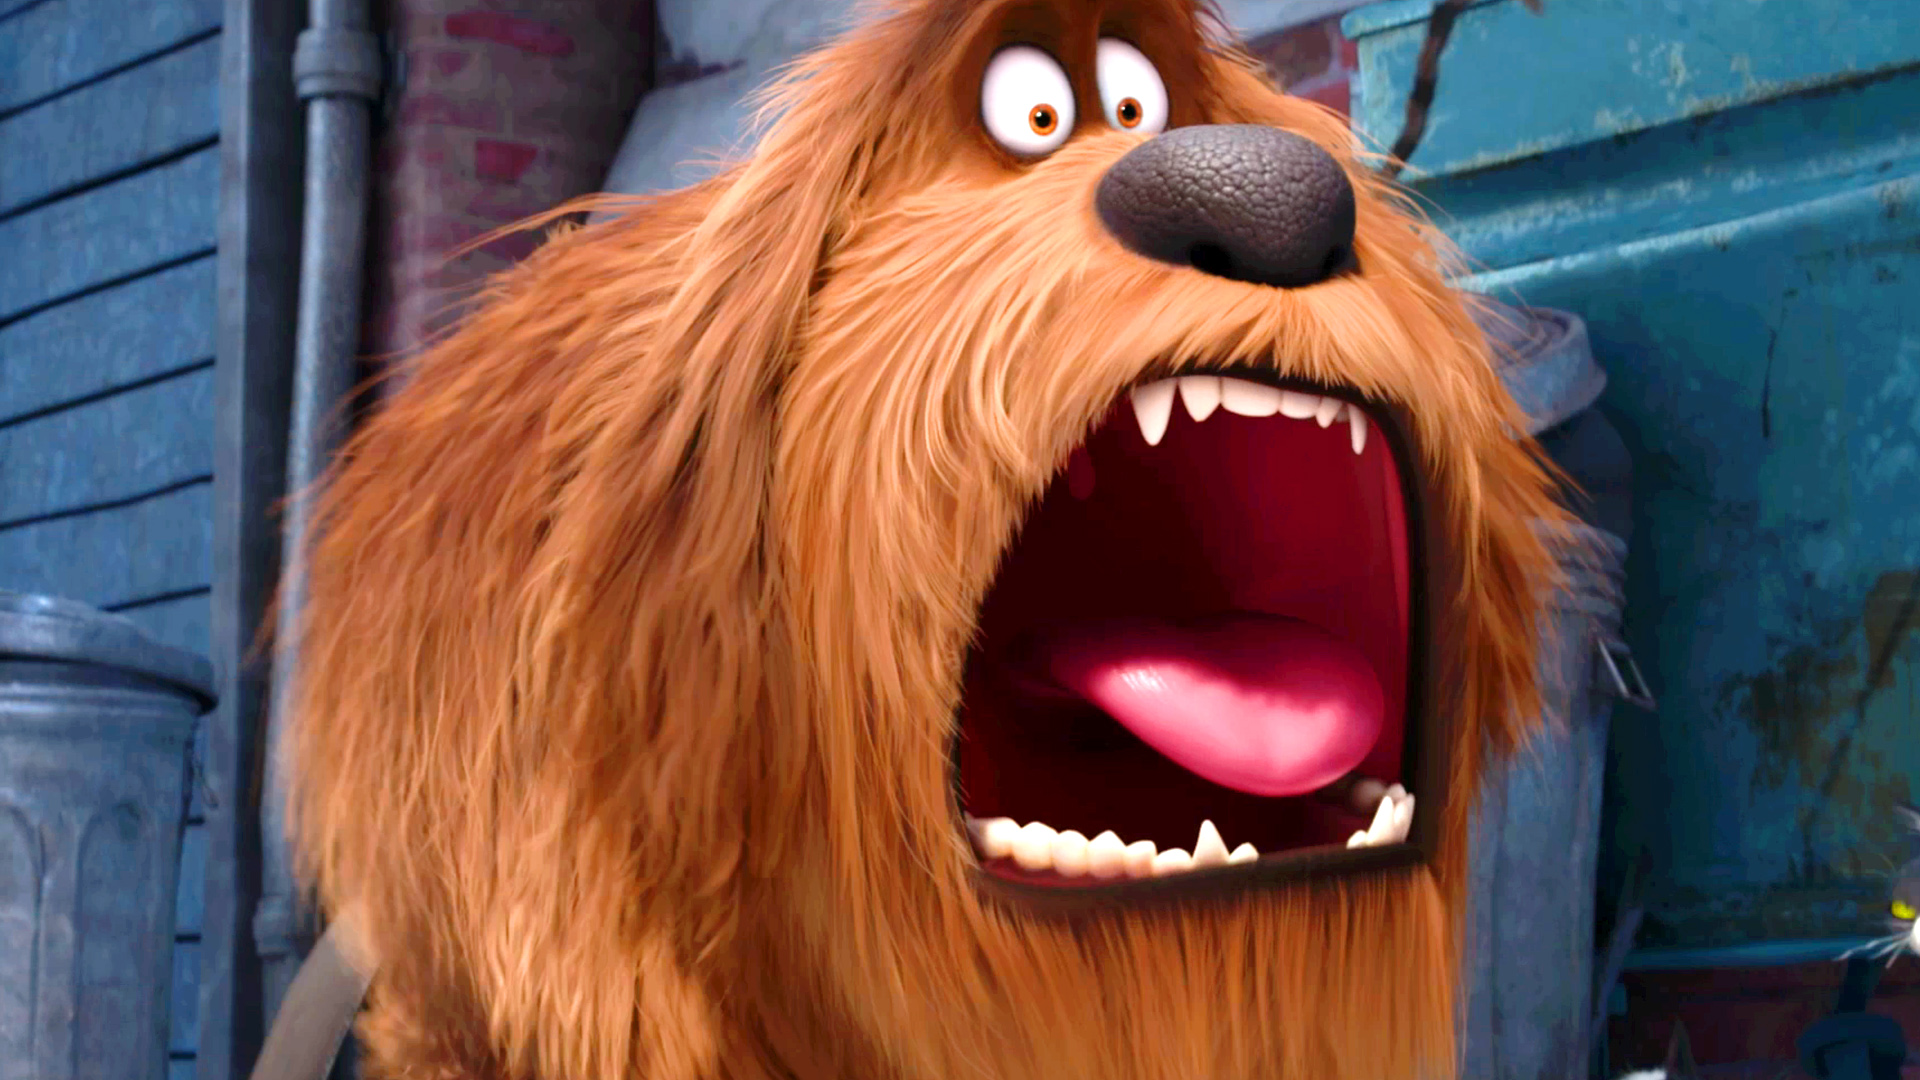 The Secret Life of Pets download the new version for ios